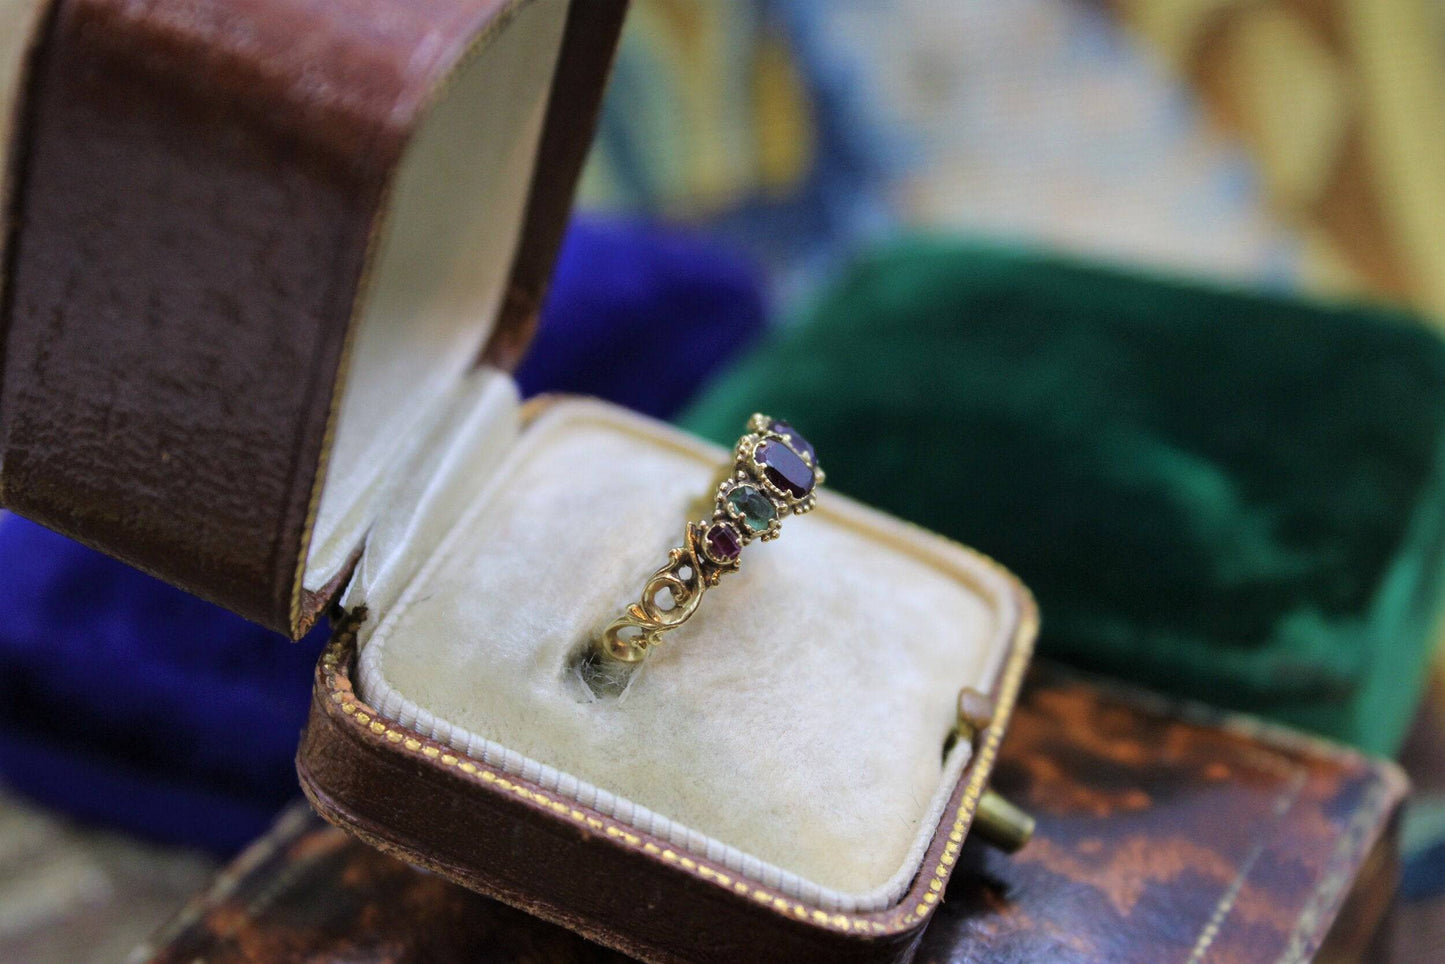 A very fine example of an early Victorian Gem set "Regard" Ring set in High Carat Yellow Gold, English, Circa 1850 - Robin Haydock Antiques